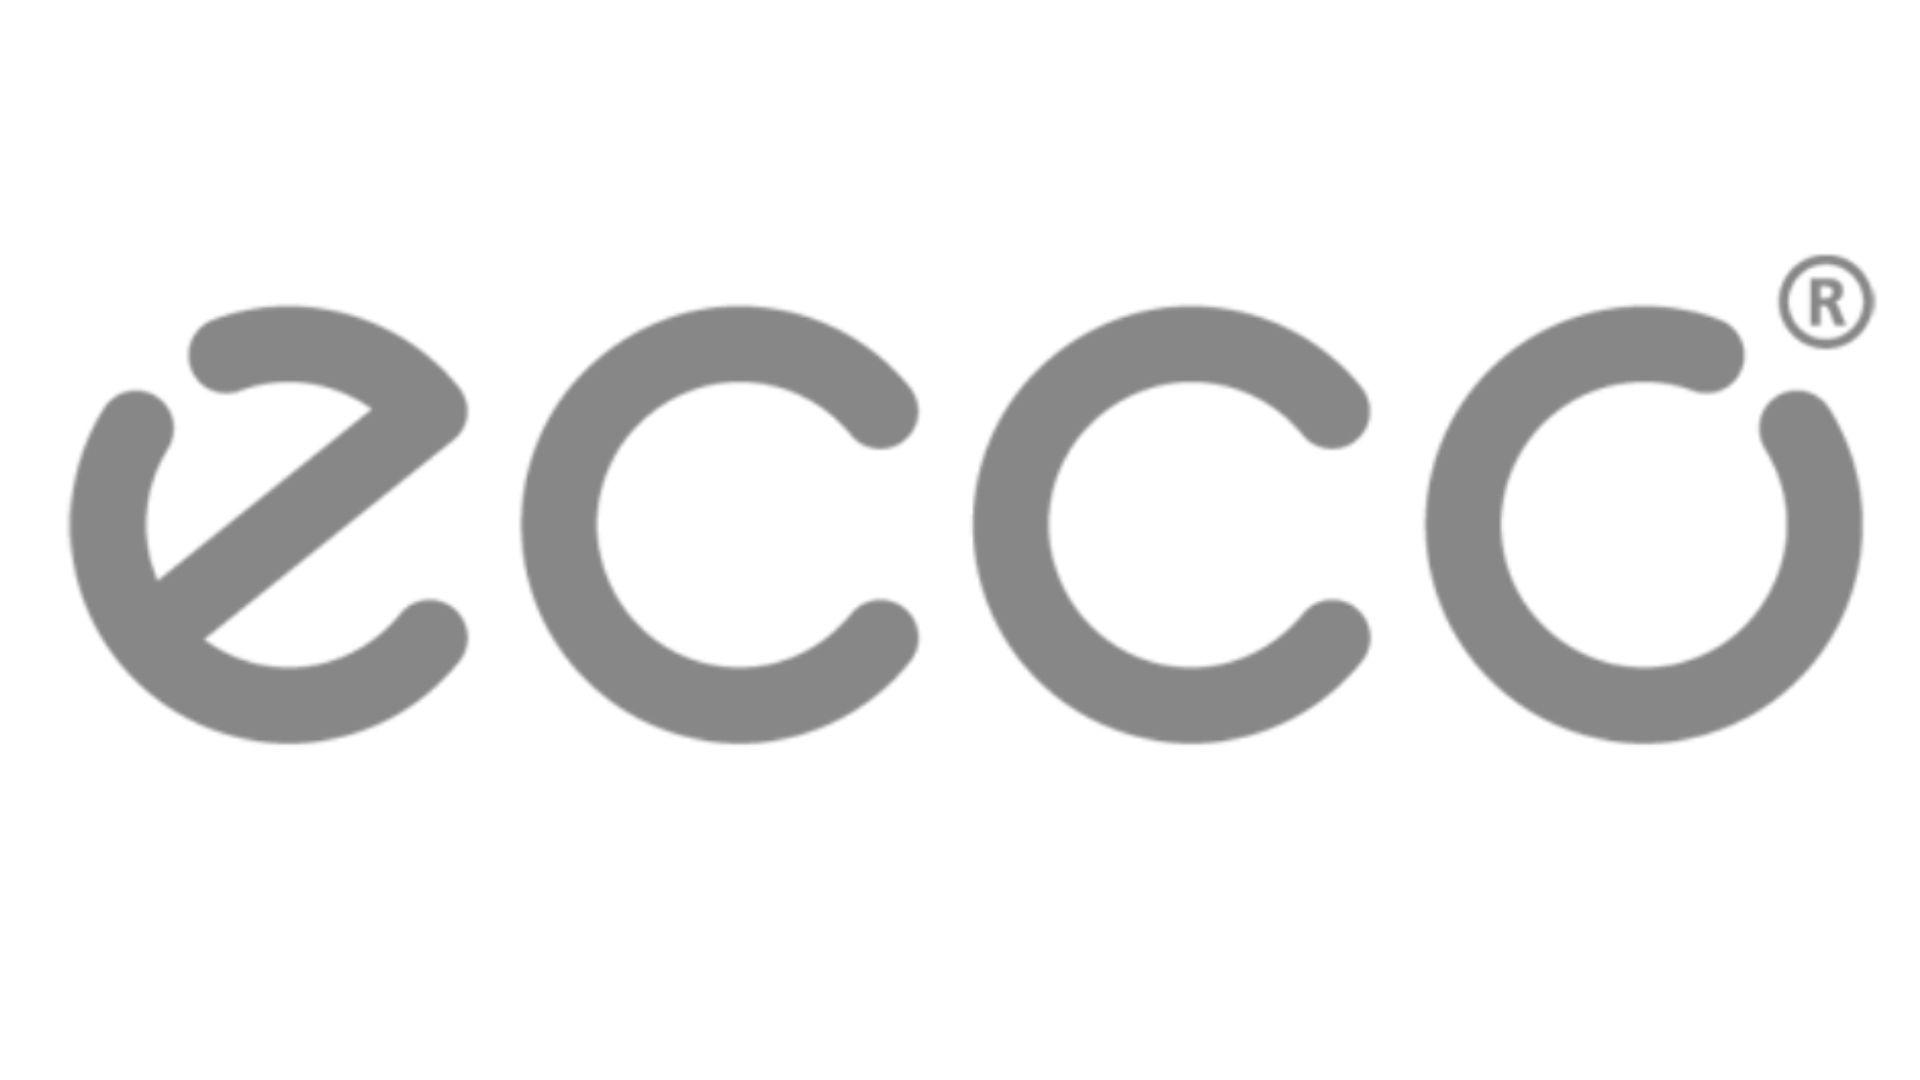 ID Collective announces list of new clients including Ecco